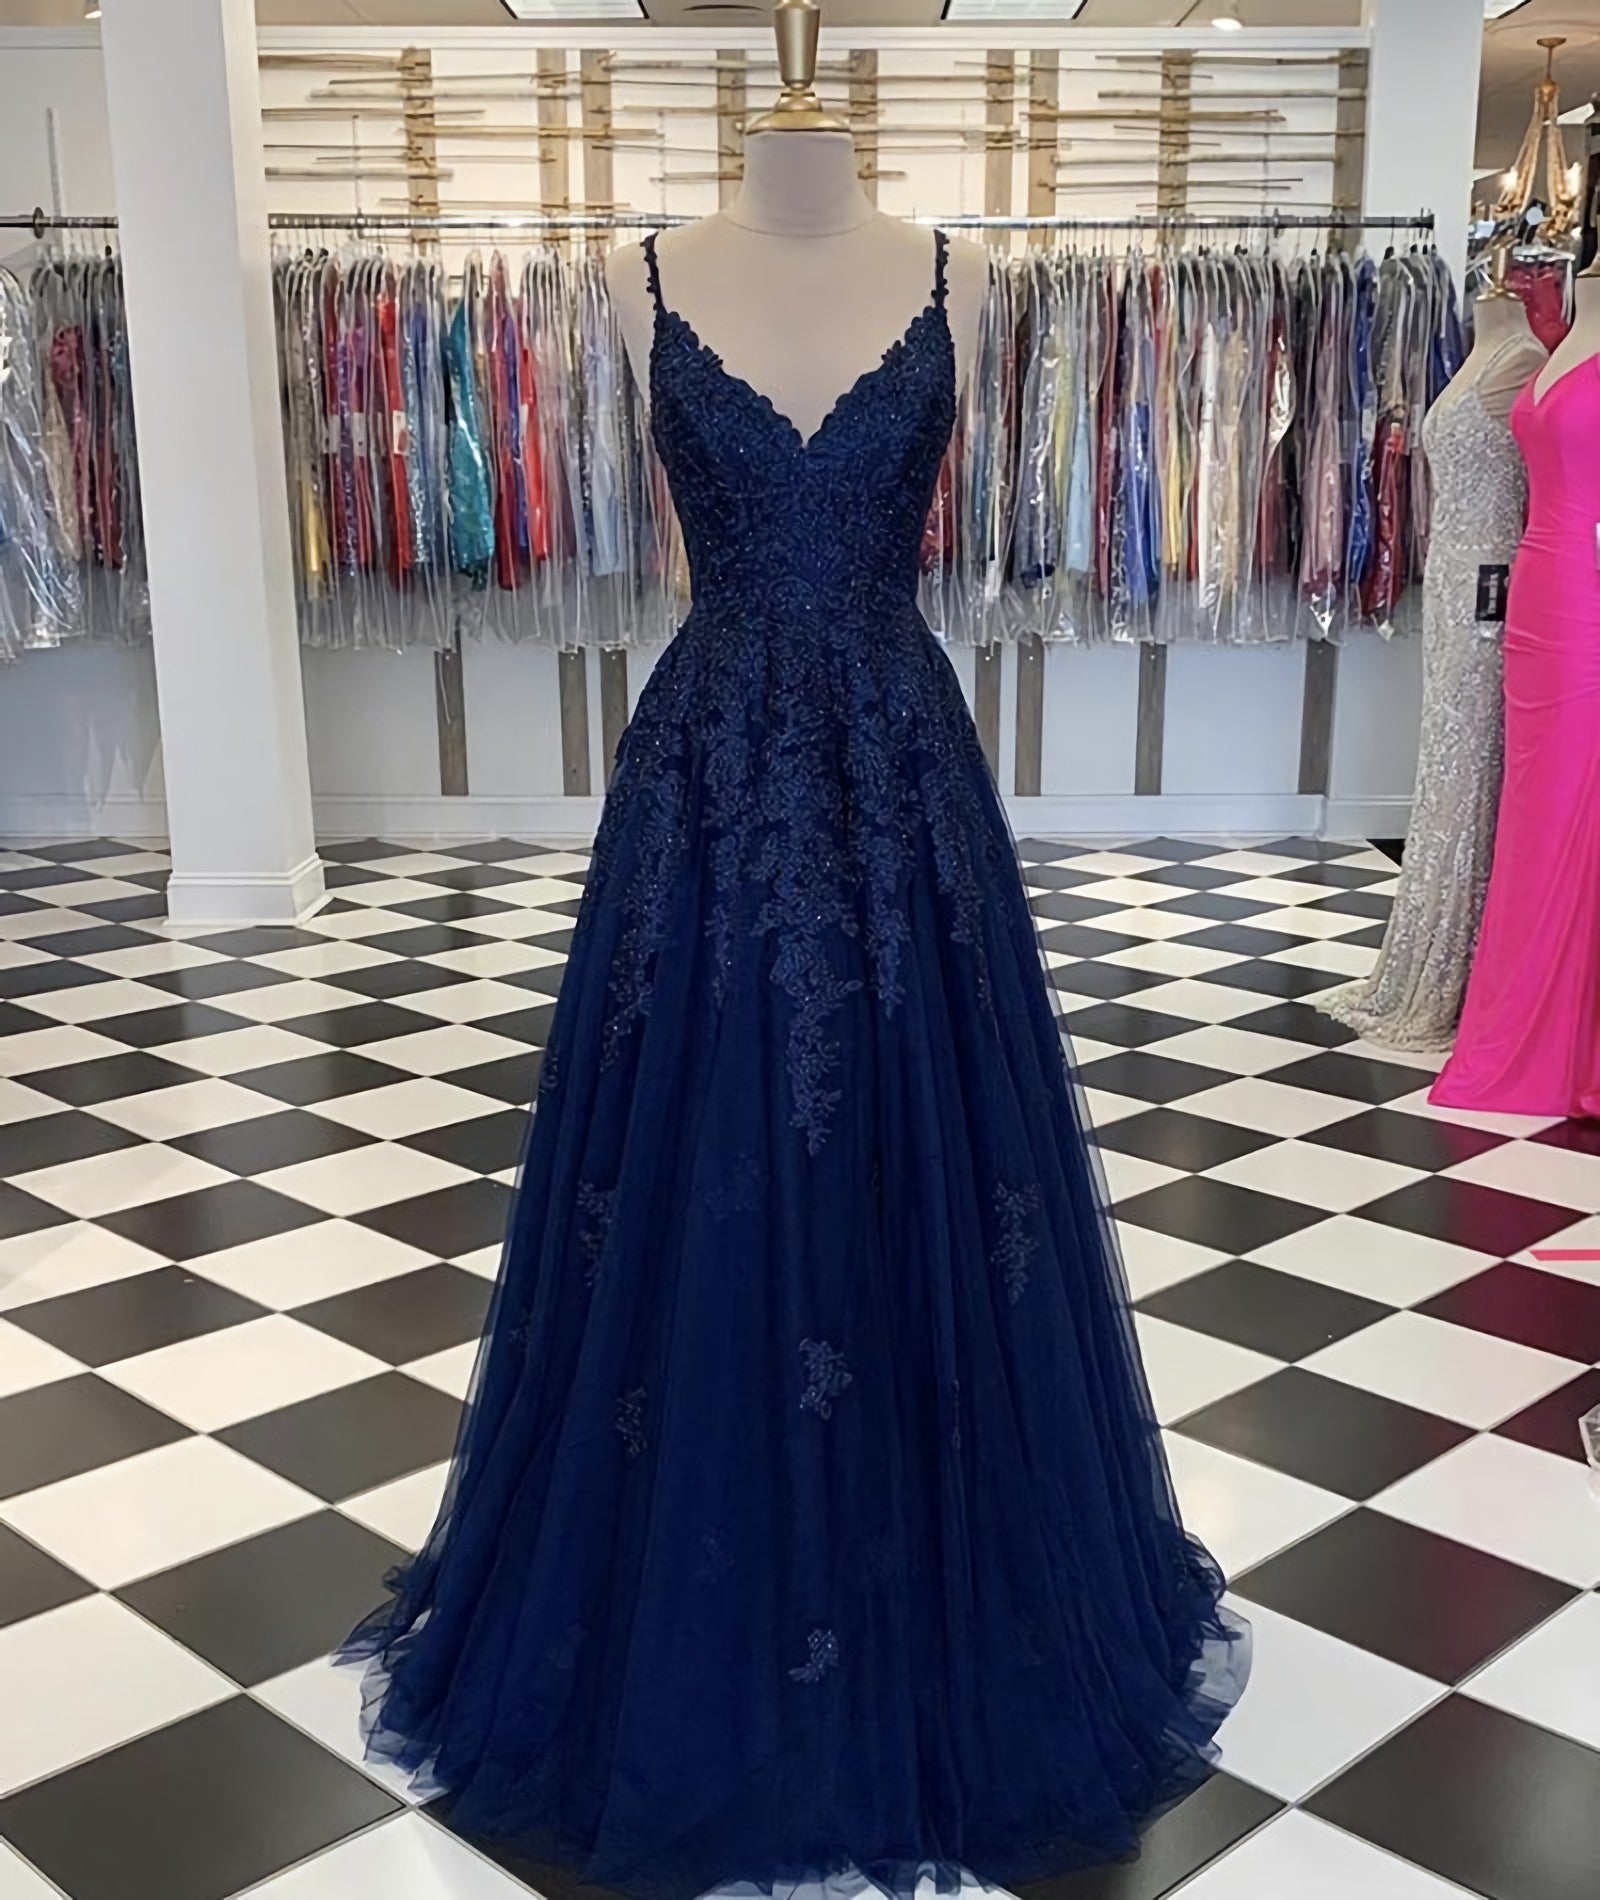 Blue V Neck Tulle Lace Long Corset Prom Dress, Evening Dress outfit, Homecoming Dresses Ideas